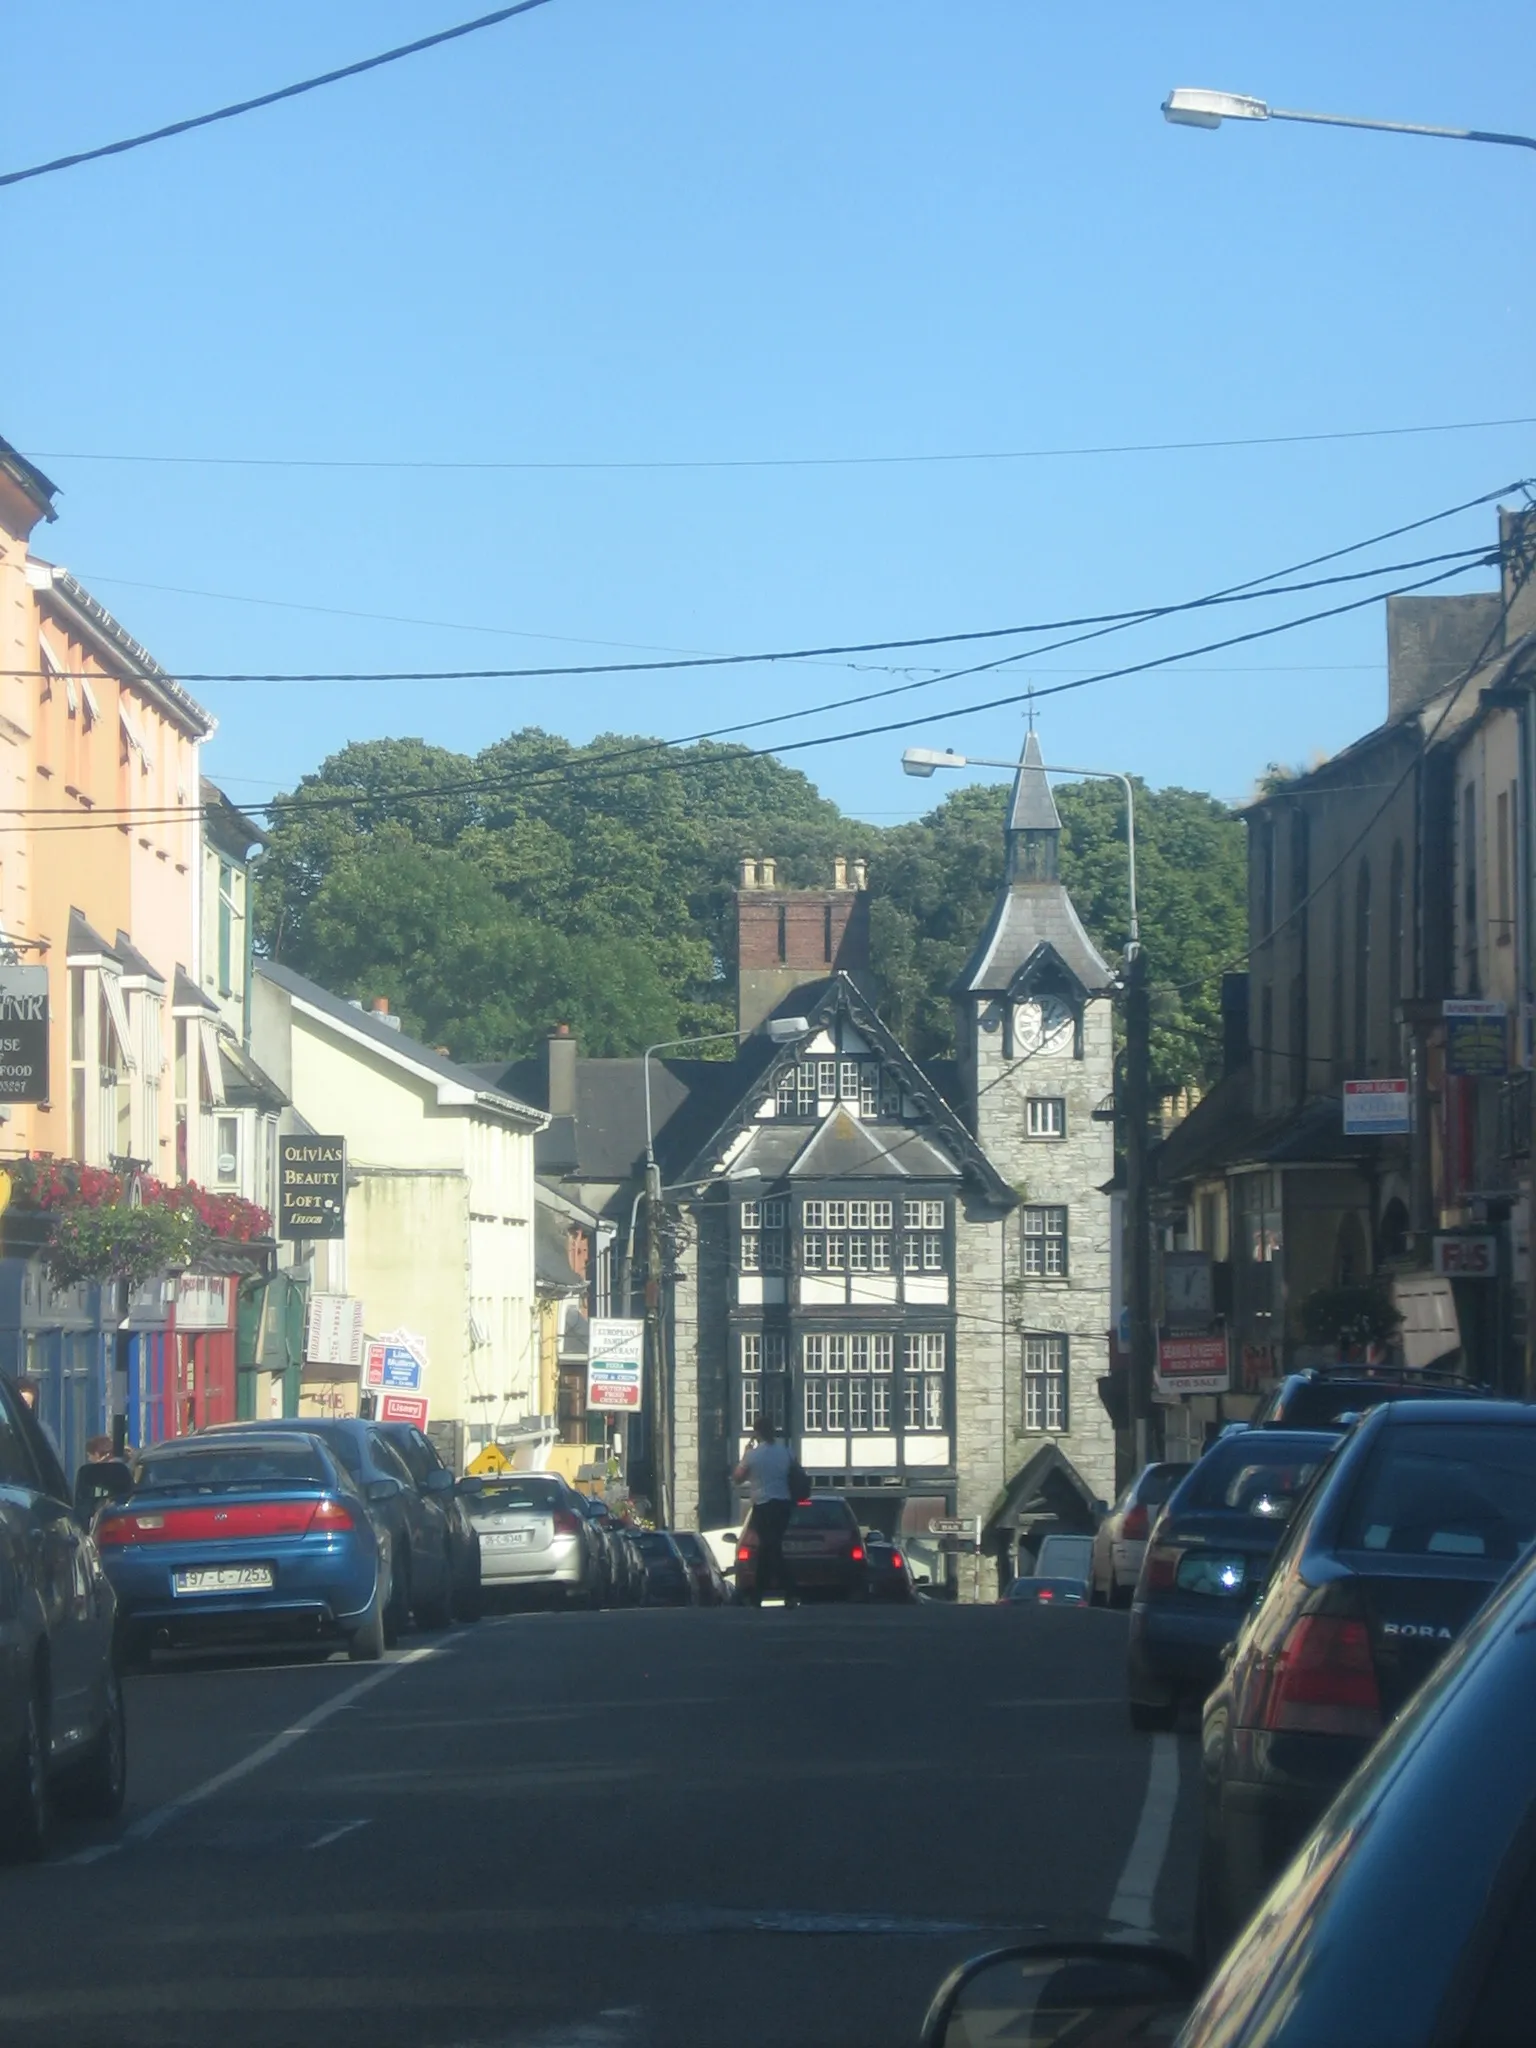 Photo showing: Main Street, Mallow, Co. Cork, Ireland. Featuring the clock tower at the junction of The Spa and Bridge Street.